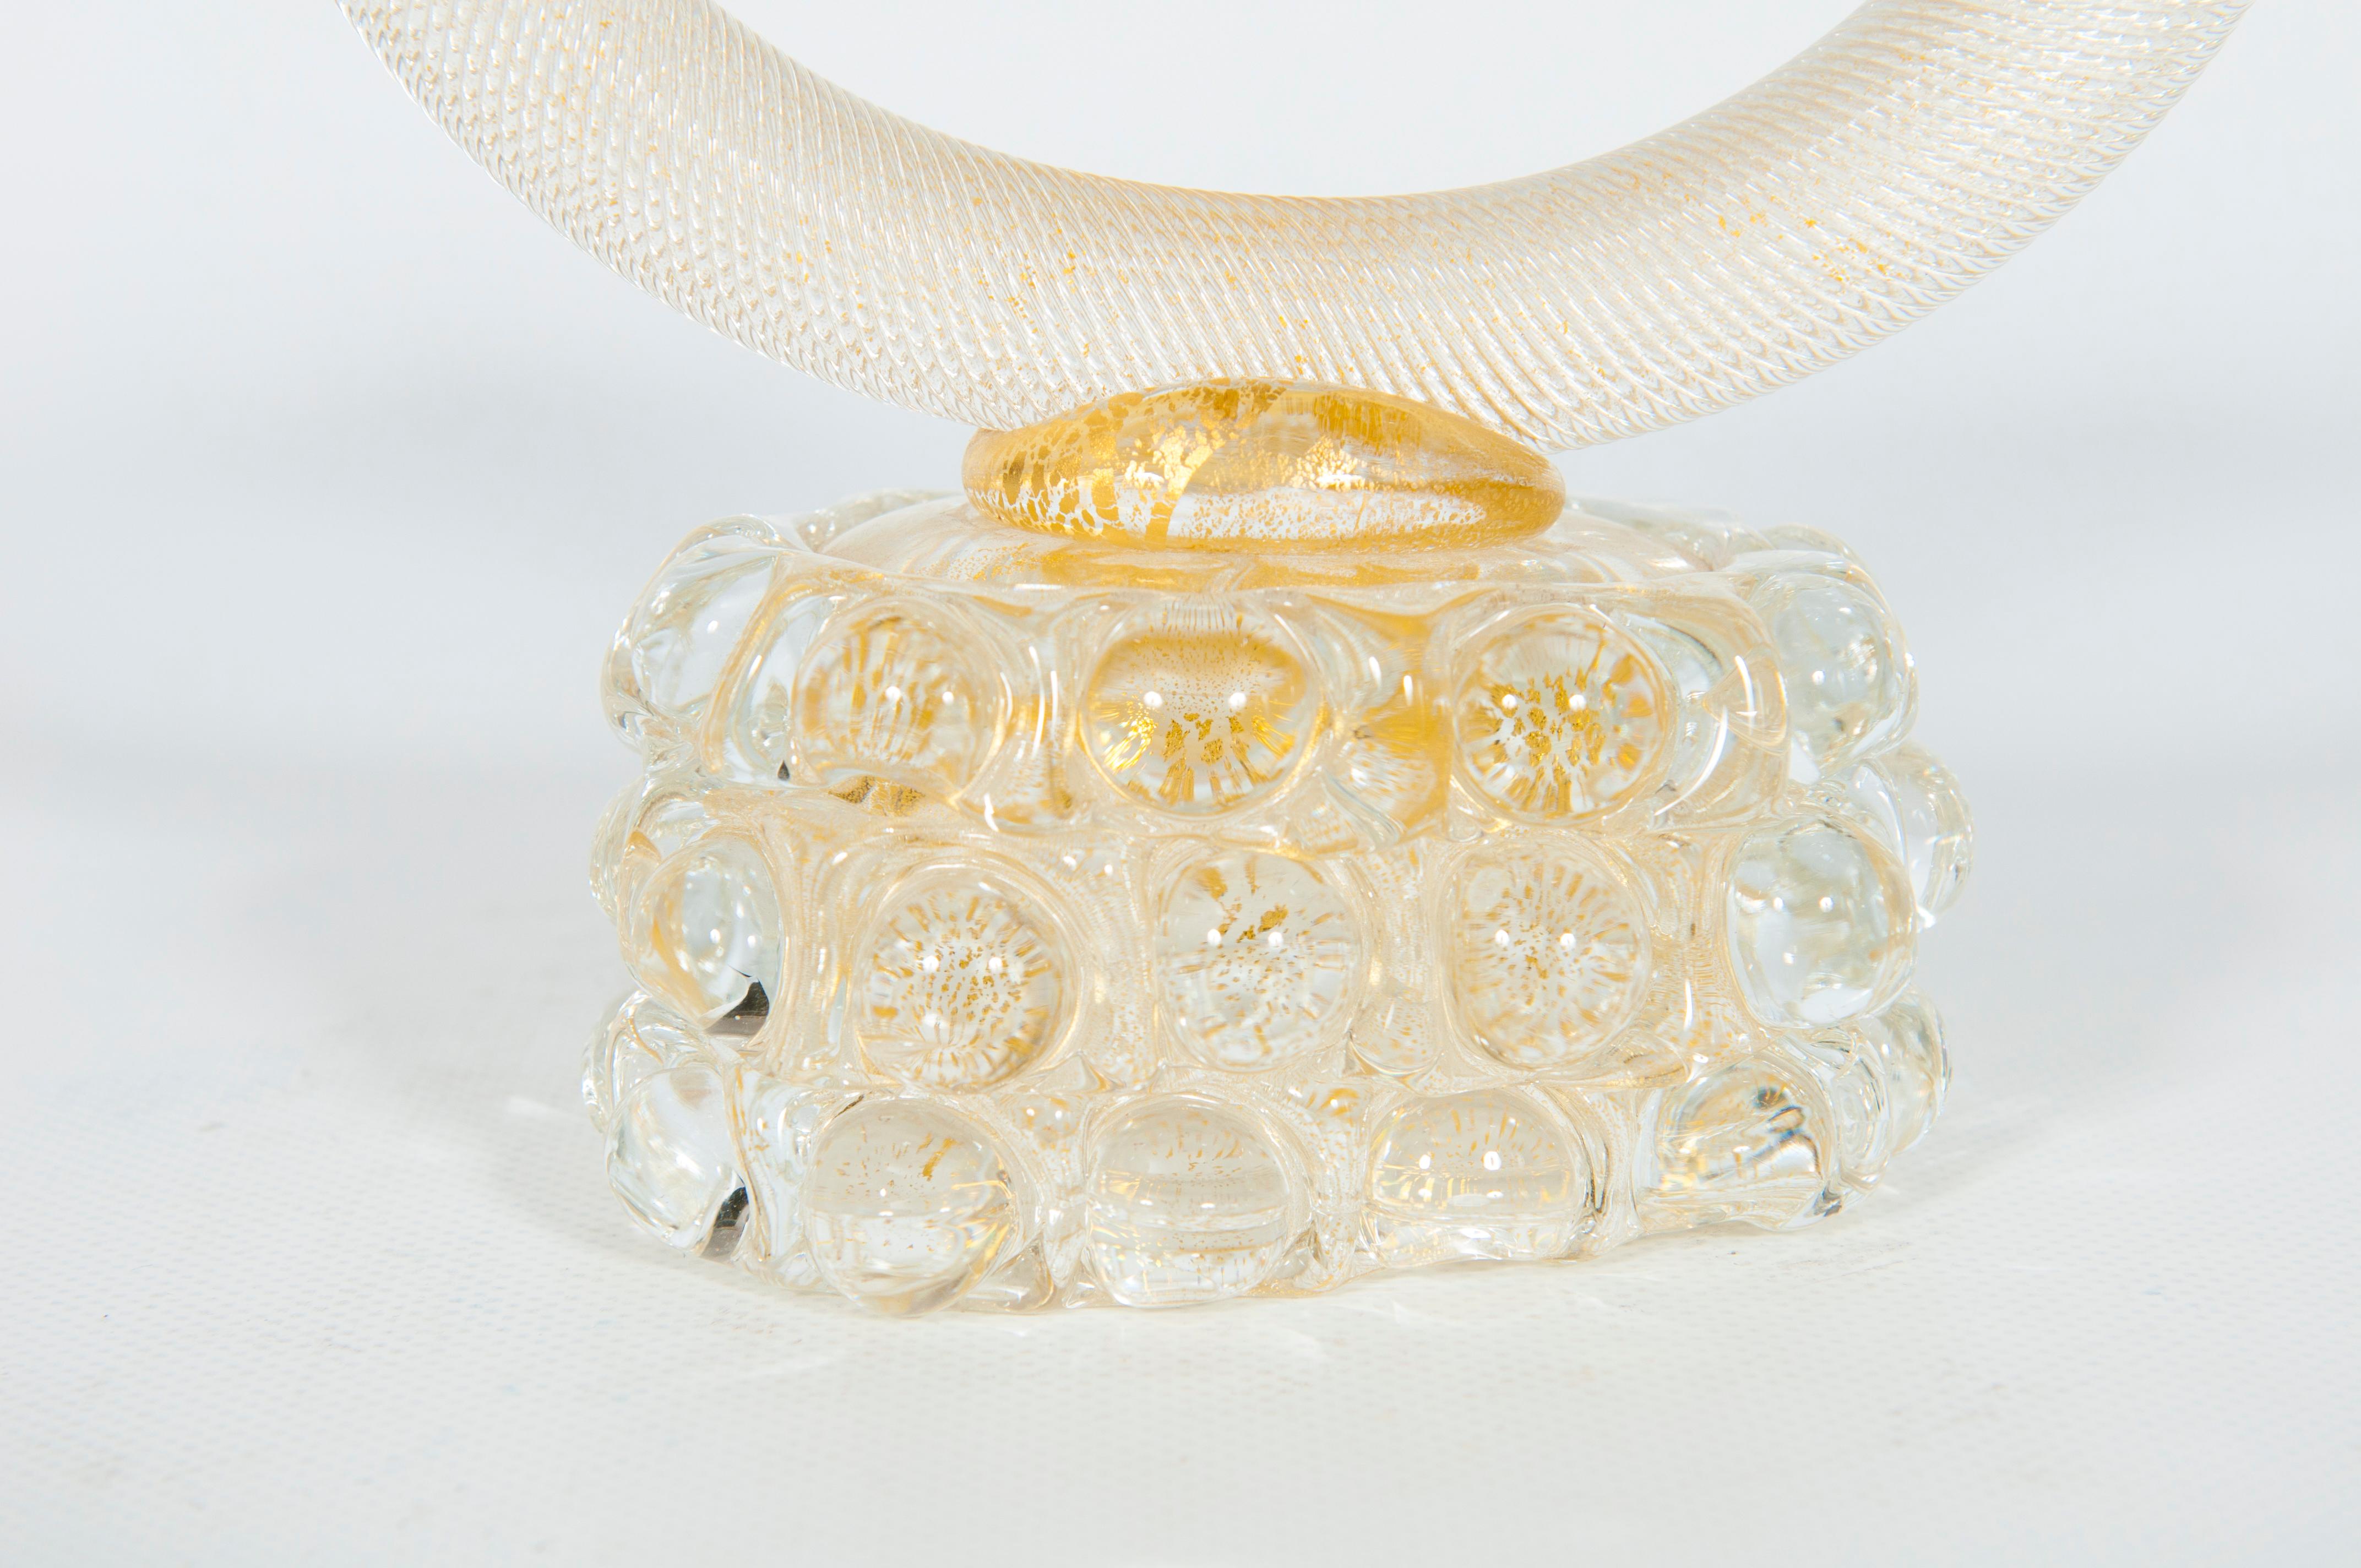 Murano Glass Torciglione Candle Holder with Submerged Gold Attributed to Seguso For Sale 1